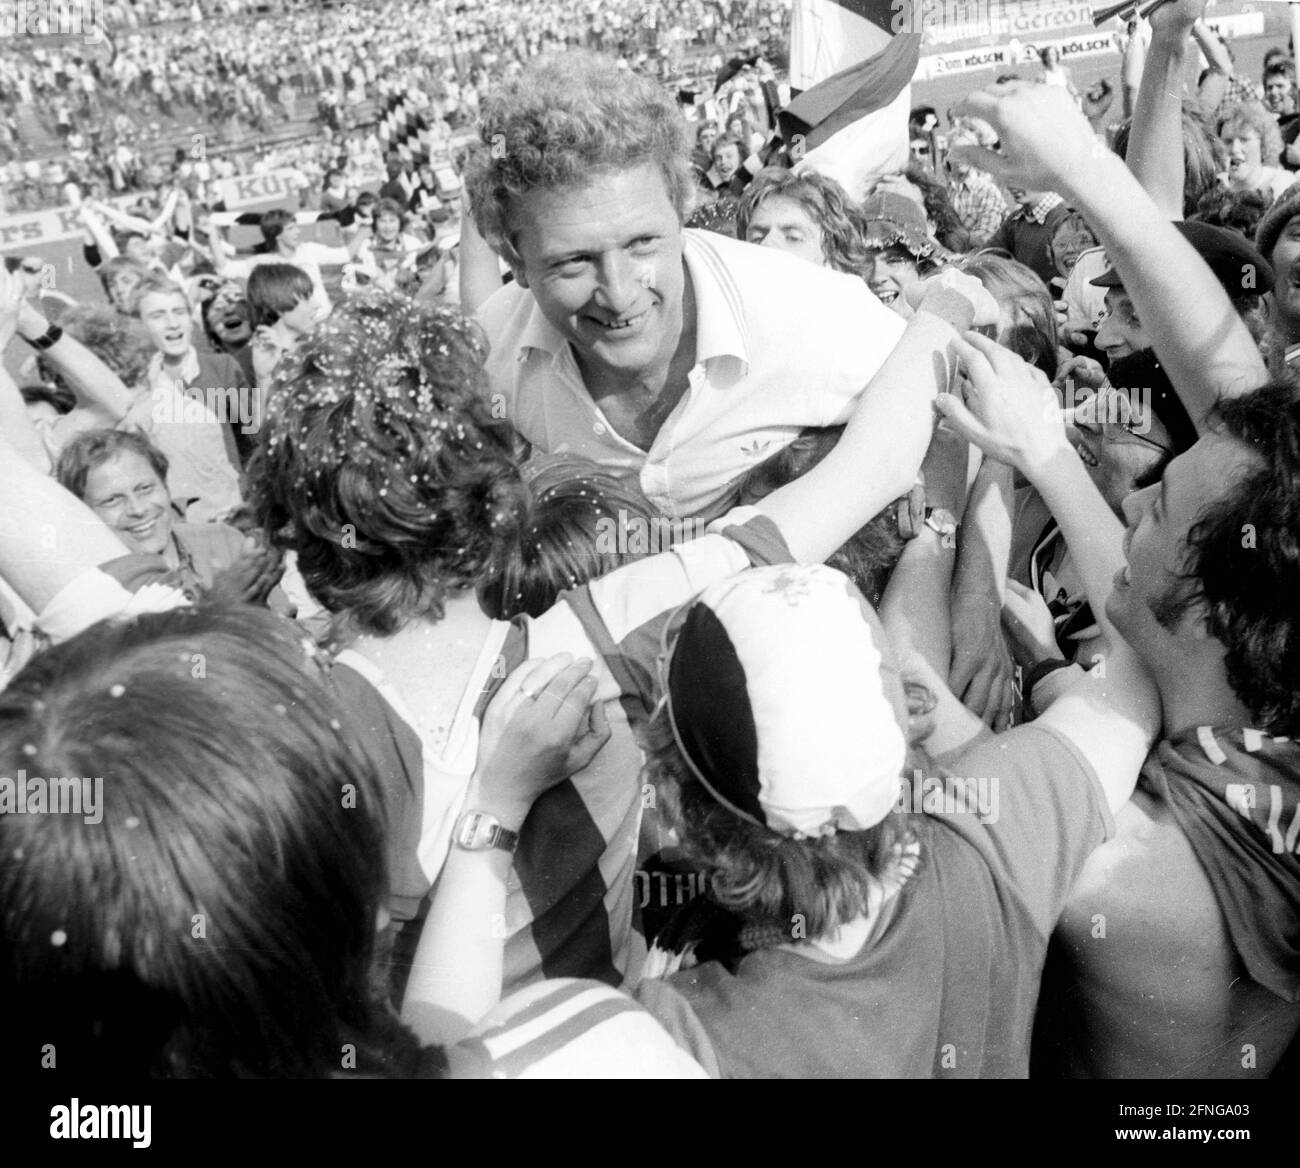 DSC Arminia Bielefeld promoted to the first Bundesliga after a 2:0 victory over Fortuna Cologne on 27.05.1978. Coach Karl-Heinz Feldkamp (Arminia) is celebrated by the fans. [automated translation] Stock Photo